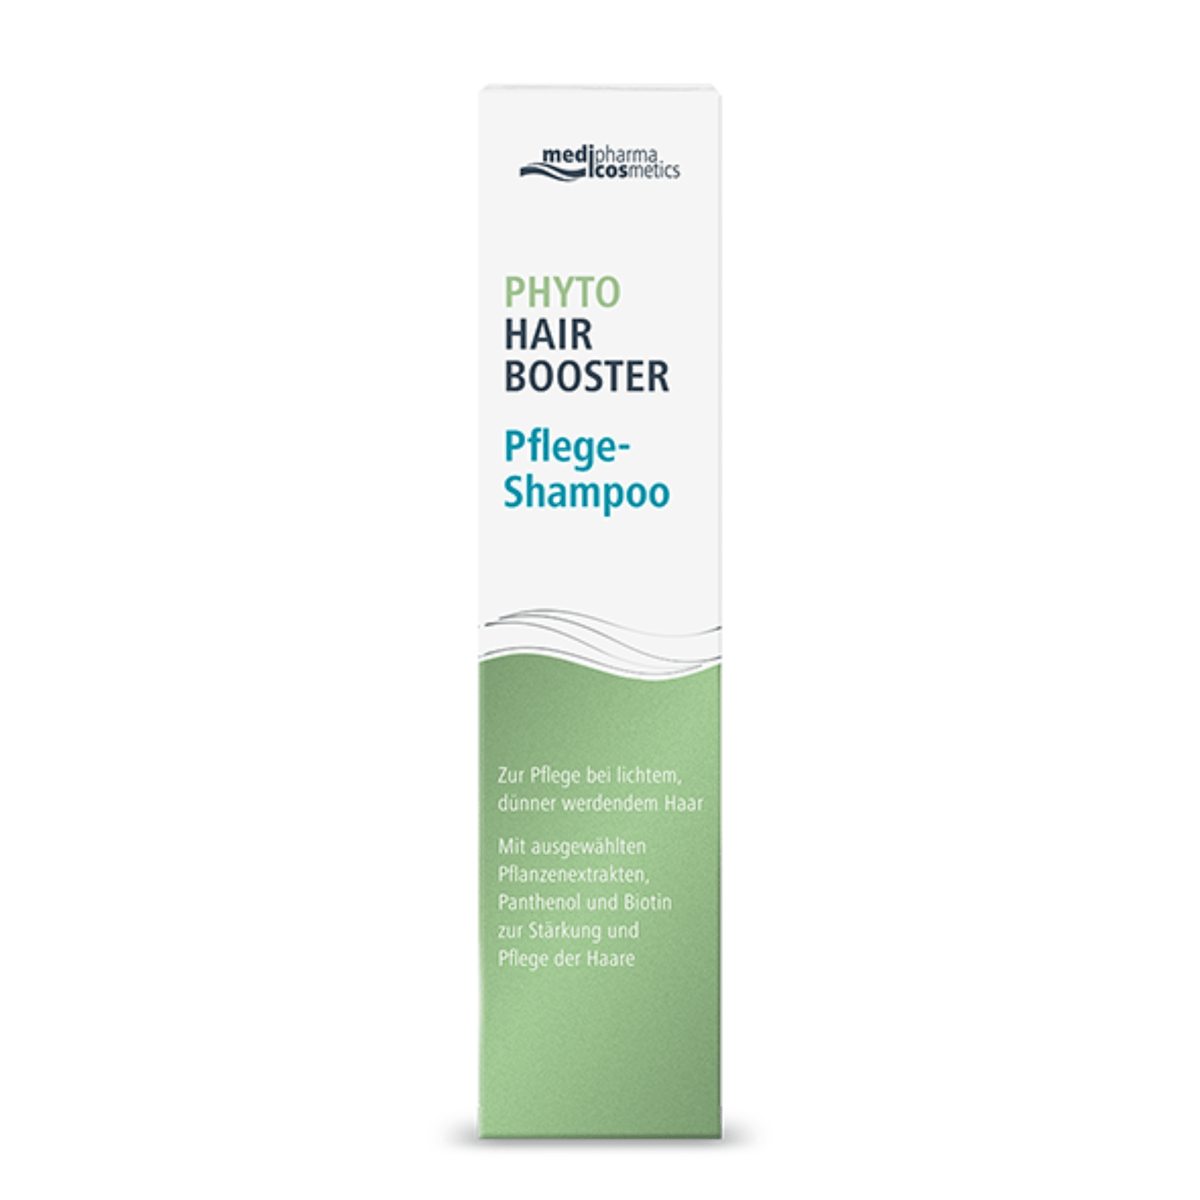 Alternate Image of Phyto Hair Booster Shampoo